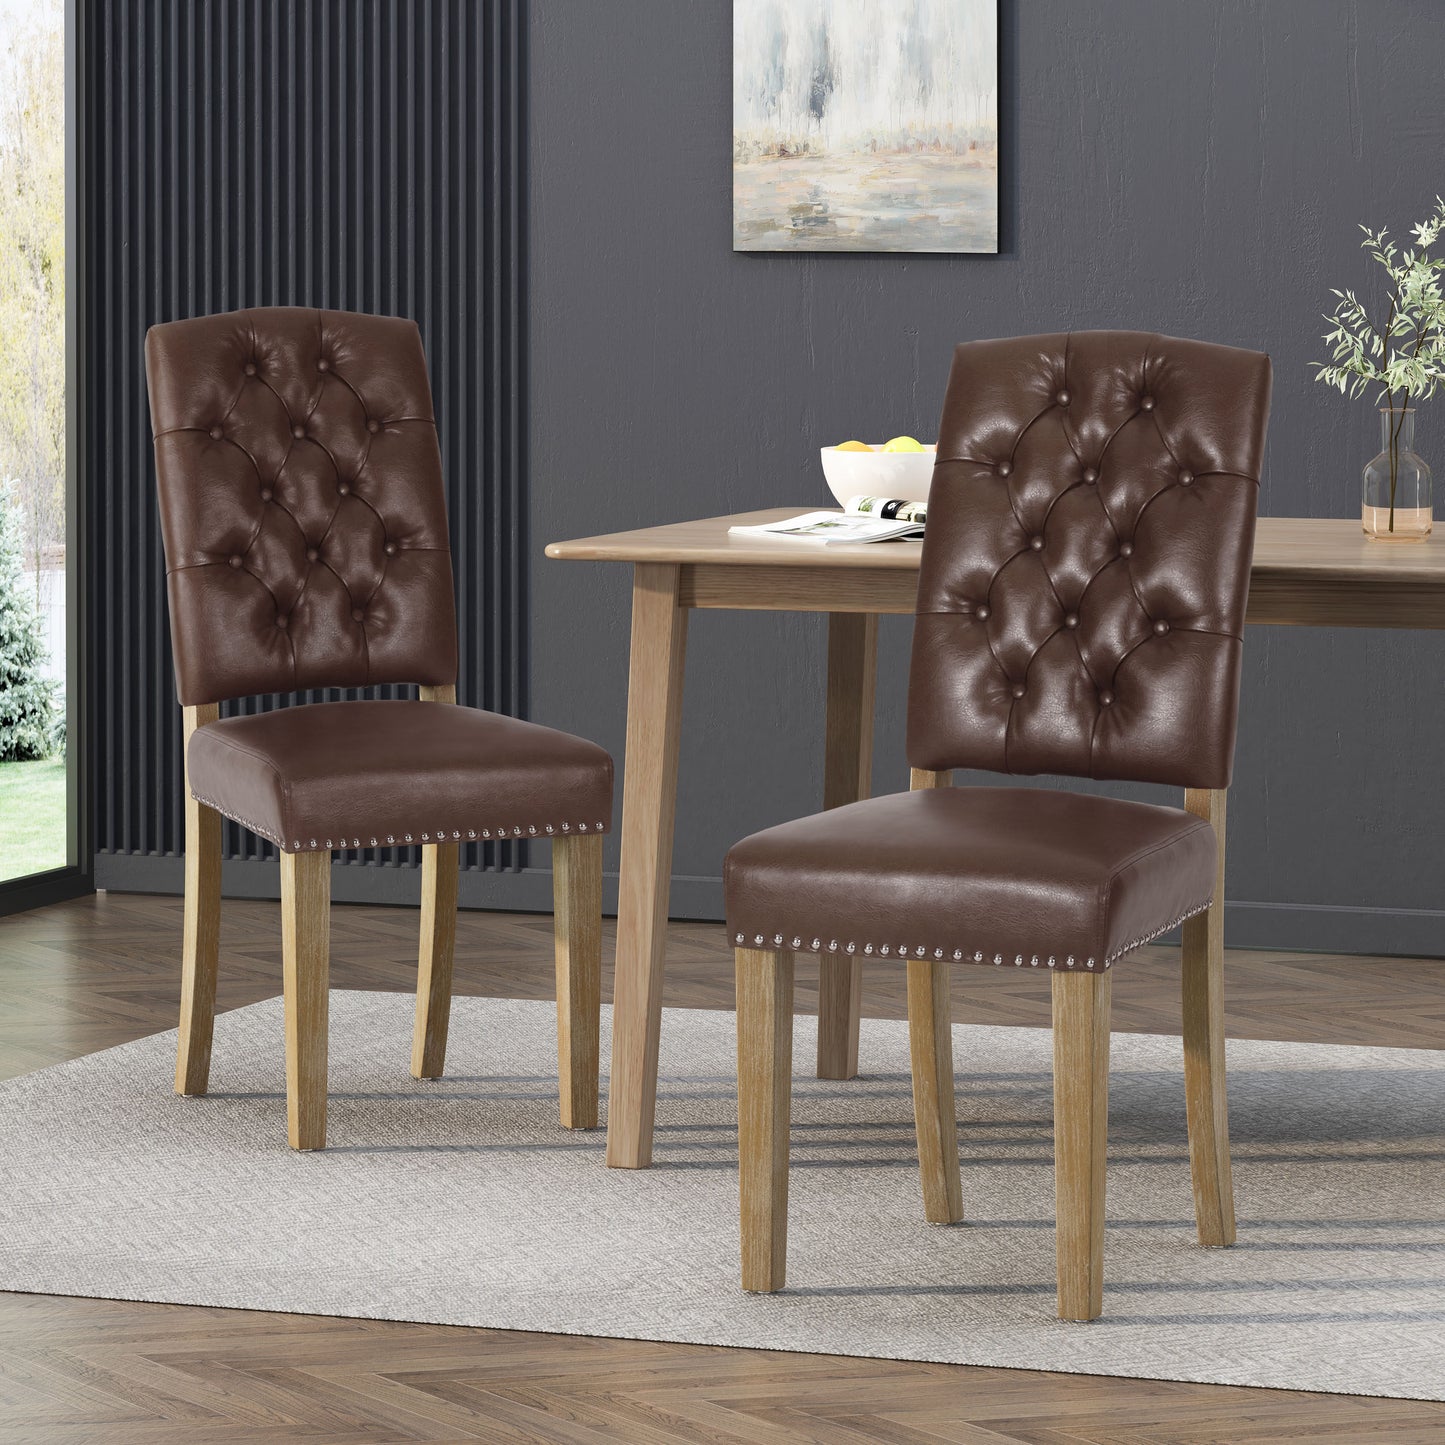 Frances Contemporary Faux Leather Tufted Dining Chairs with Nailhead Trim, Set of 2